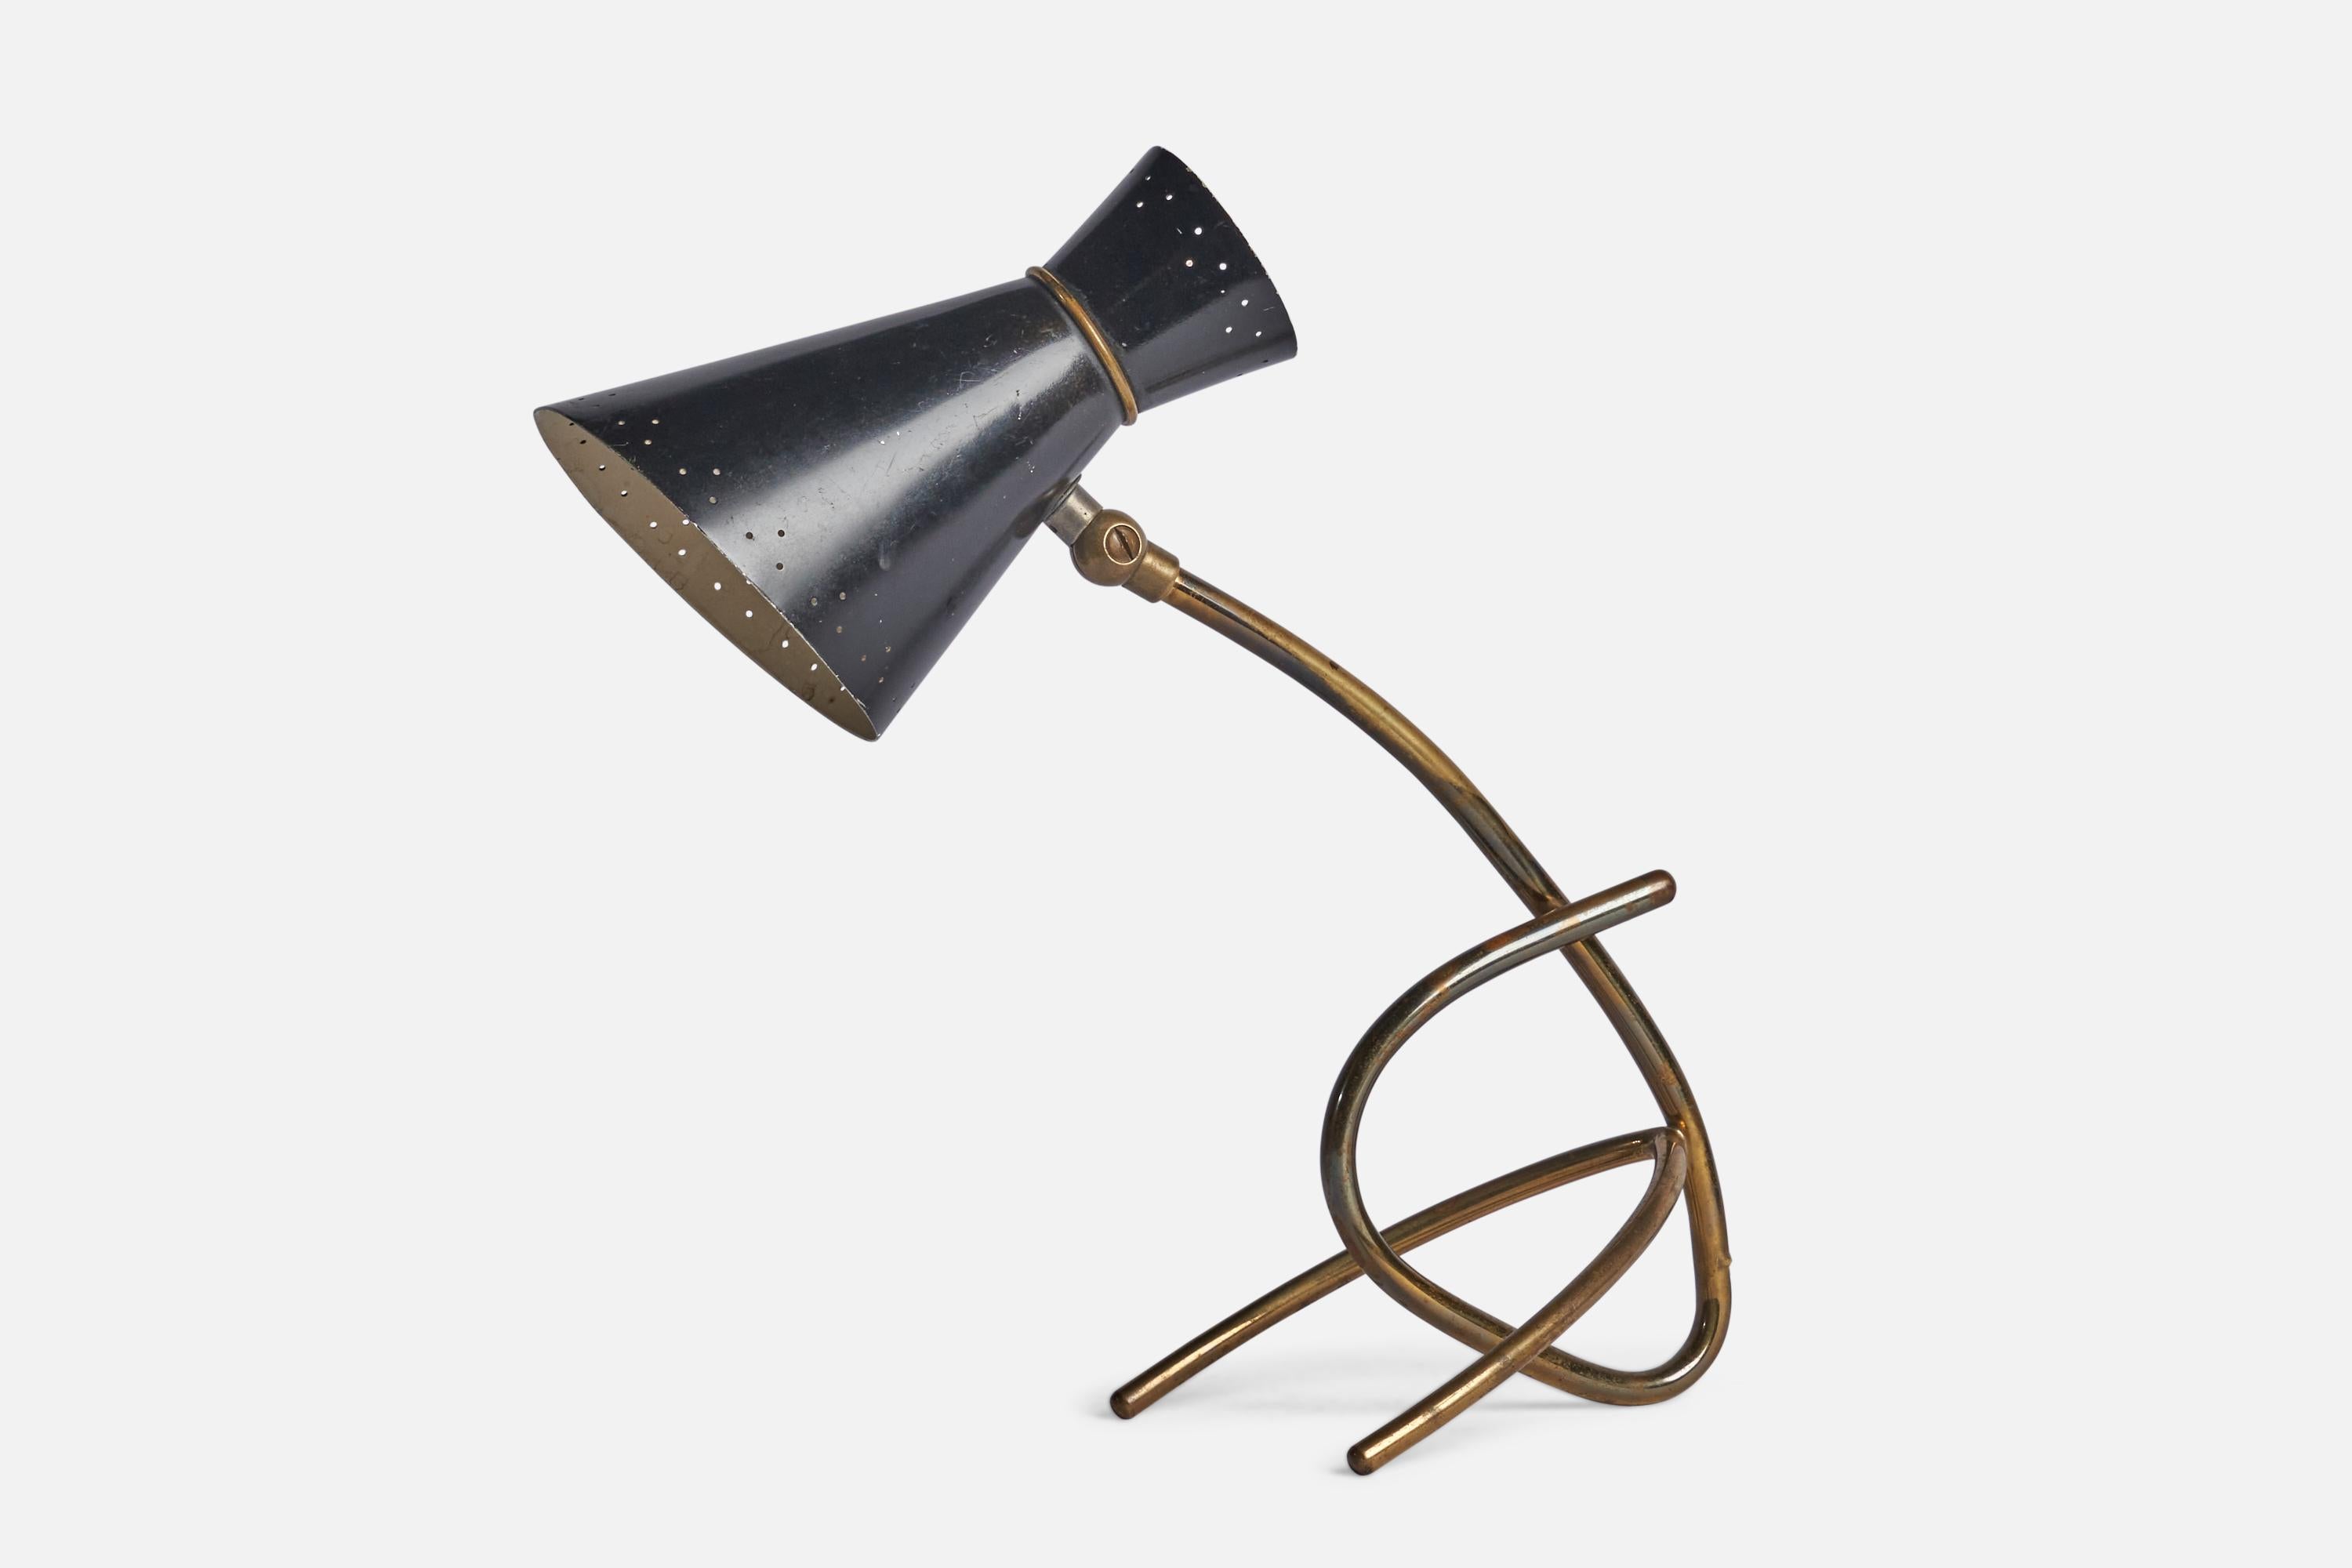 A brass and black-lacquered metal table lamp designed and produced by Svend Aage Holm Sørensen, Denmark, 1950s

Overall Dimensions (inches): 11.75” H x 4.75 W x 11.5” D
Bulb Specifications: E-14 Bulb
Number of Sockets: 1
All lighting will be